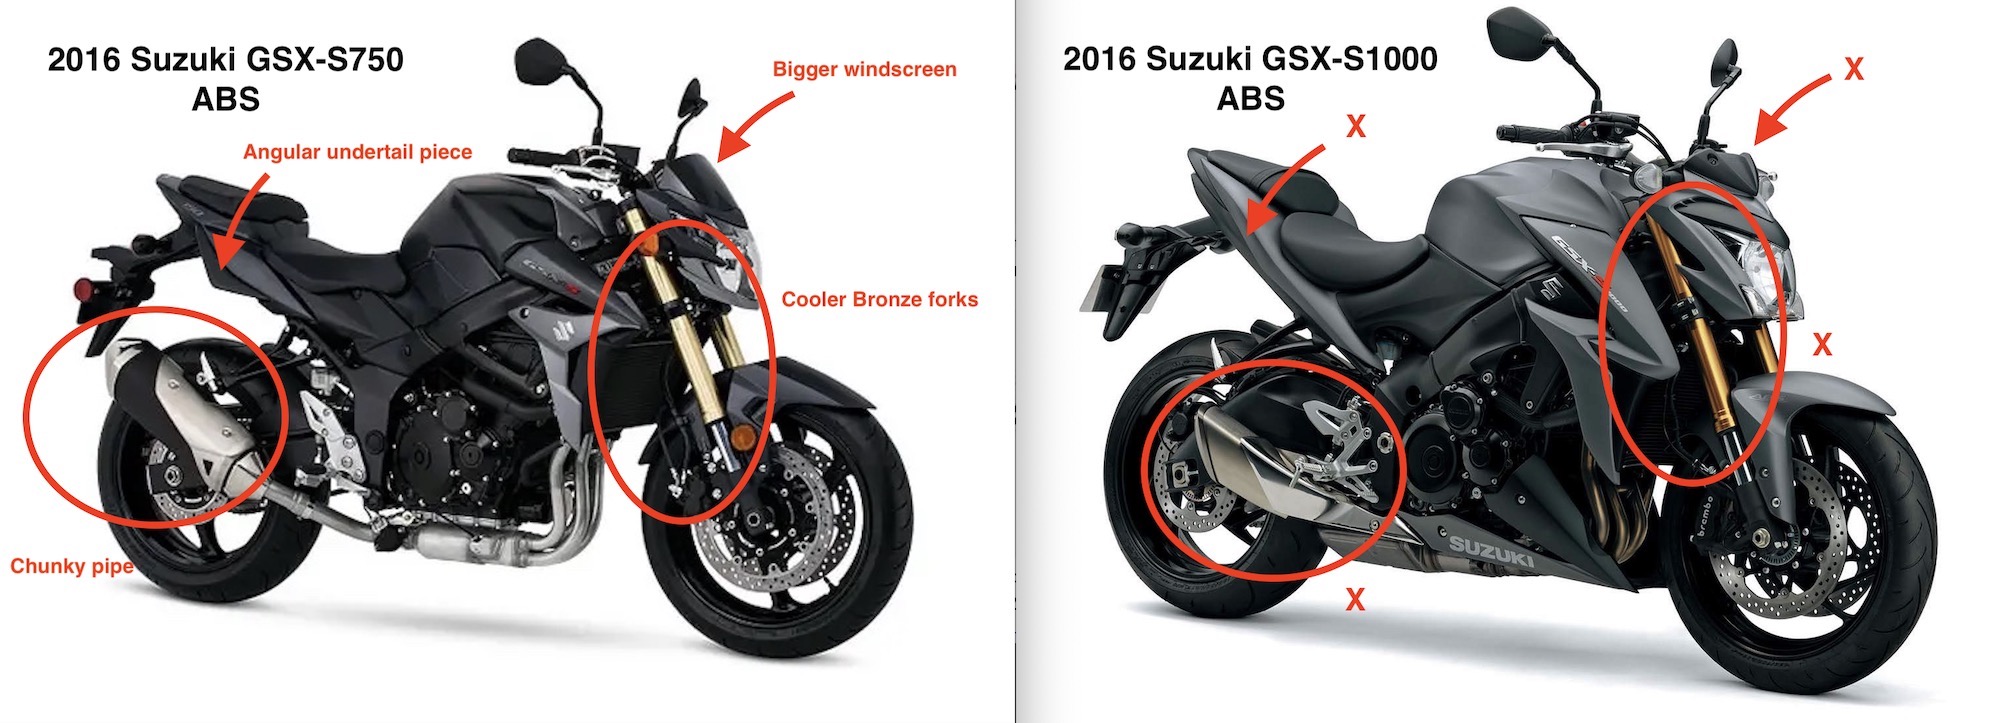 A side-by-side view of the 2016 Suzuki GSX-S750 and 1000. Media sourced from Suzuki.